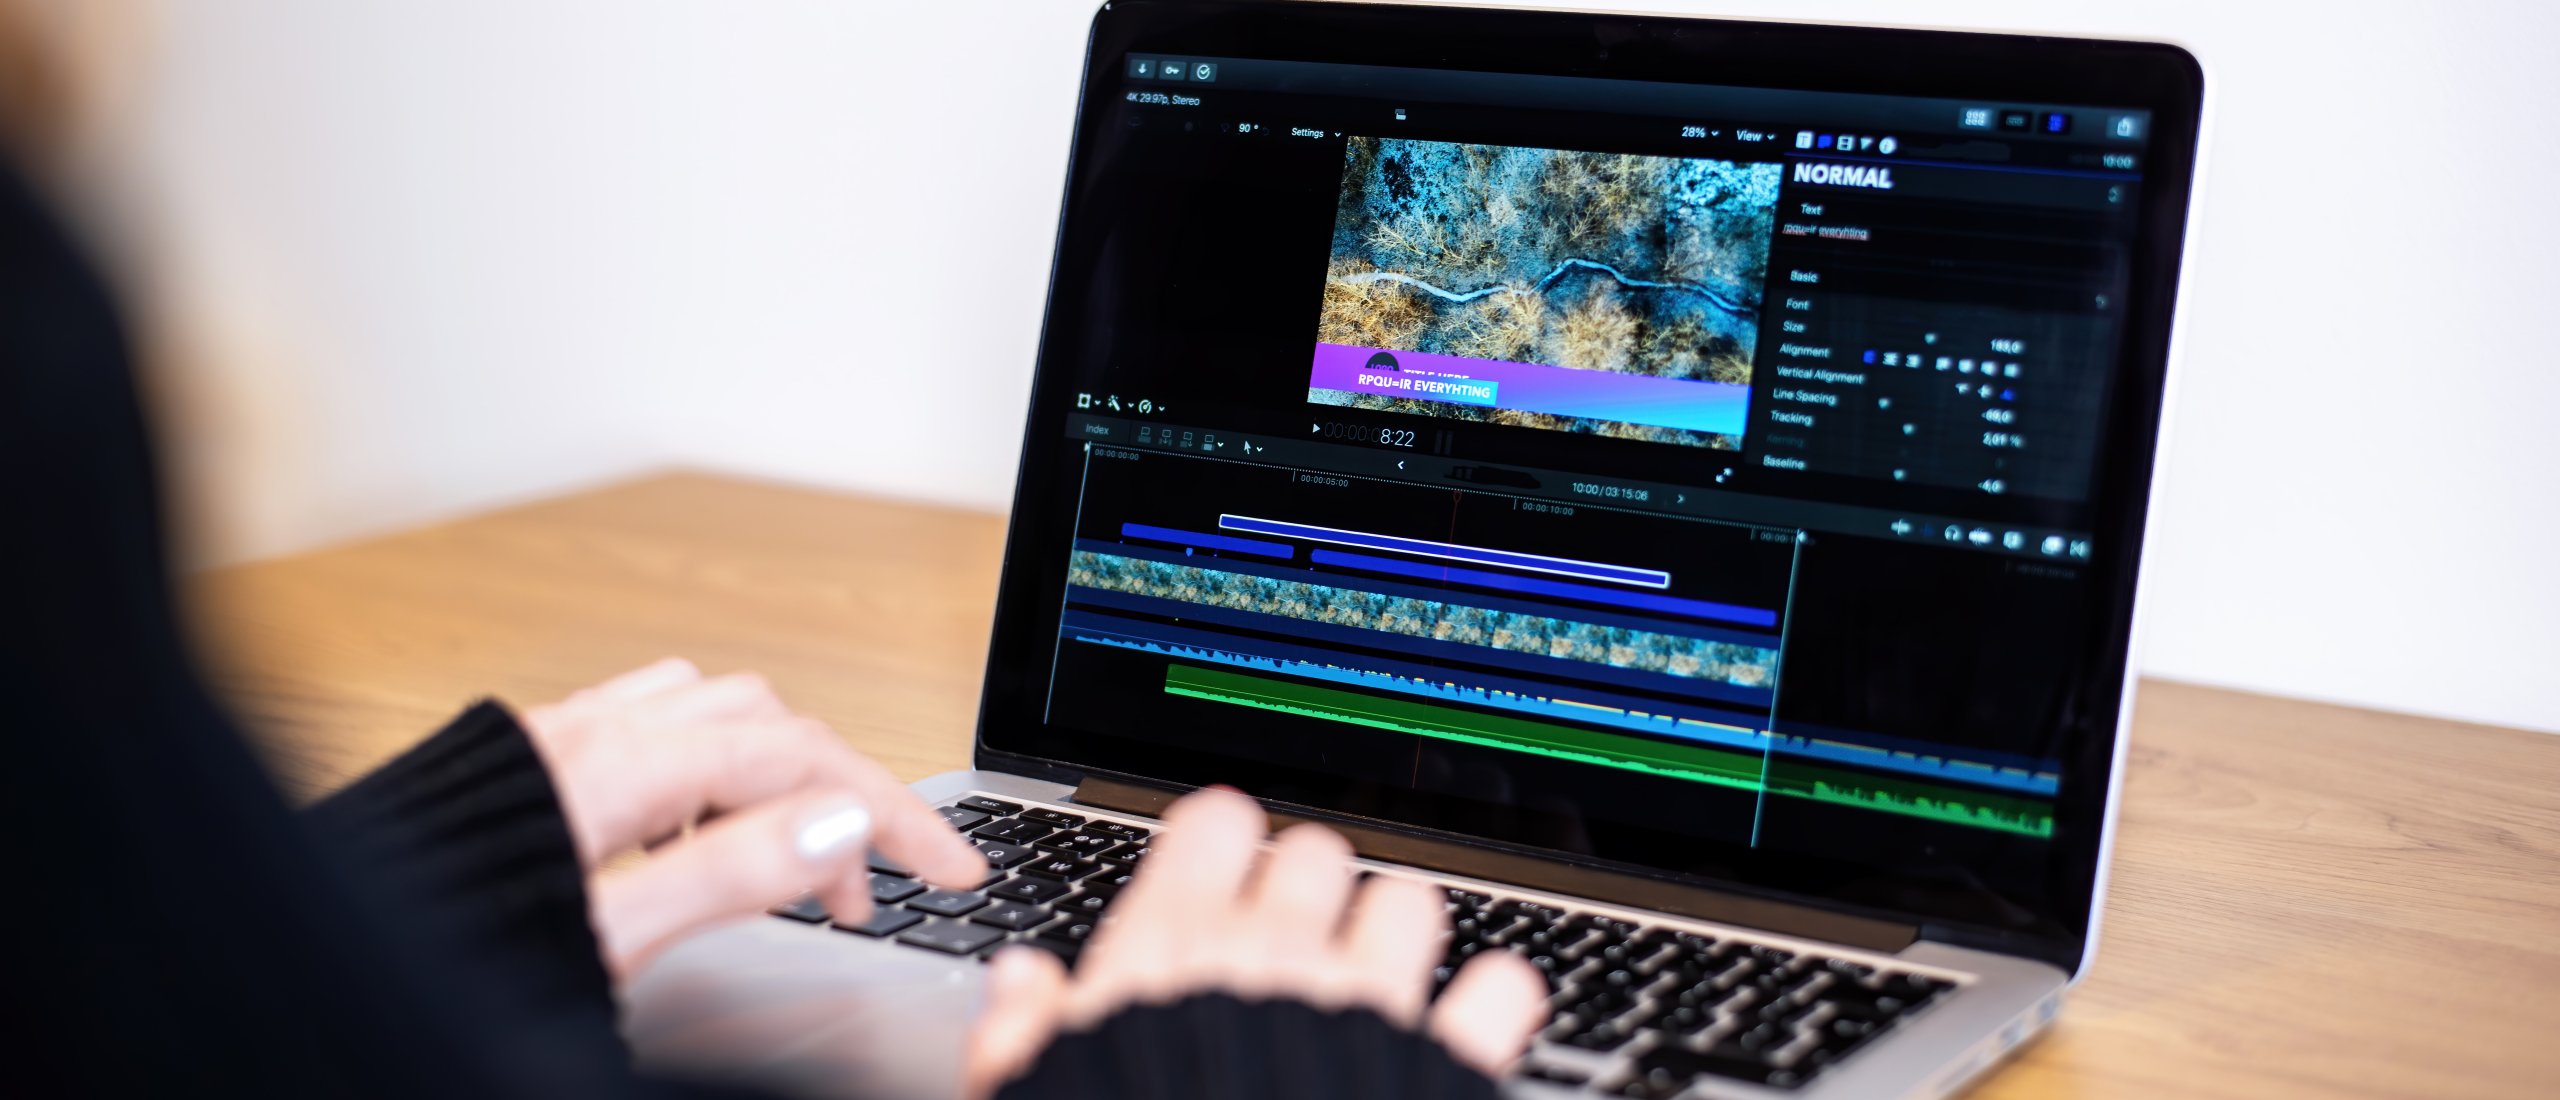 FFmpeg: 10 video editing commands